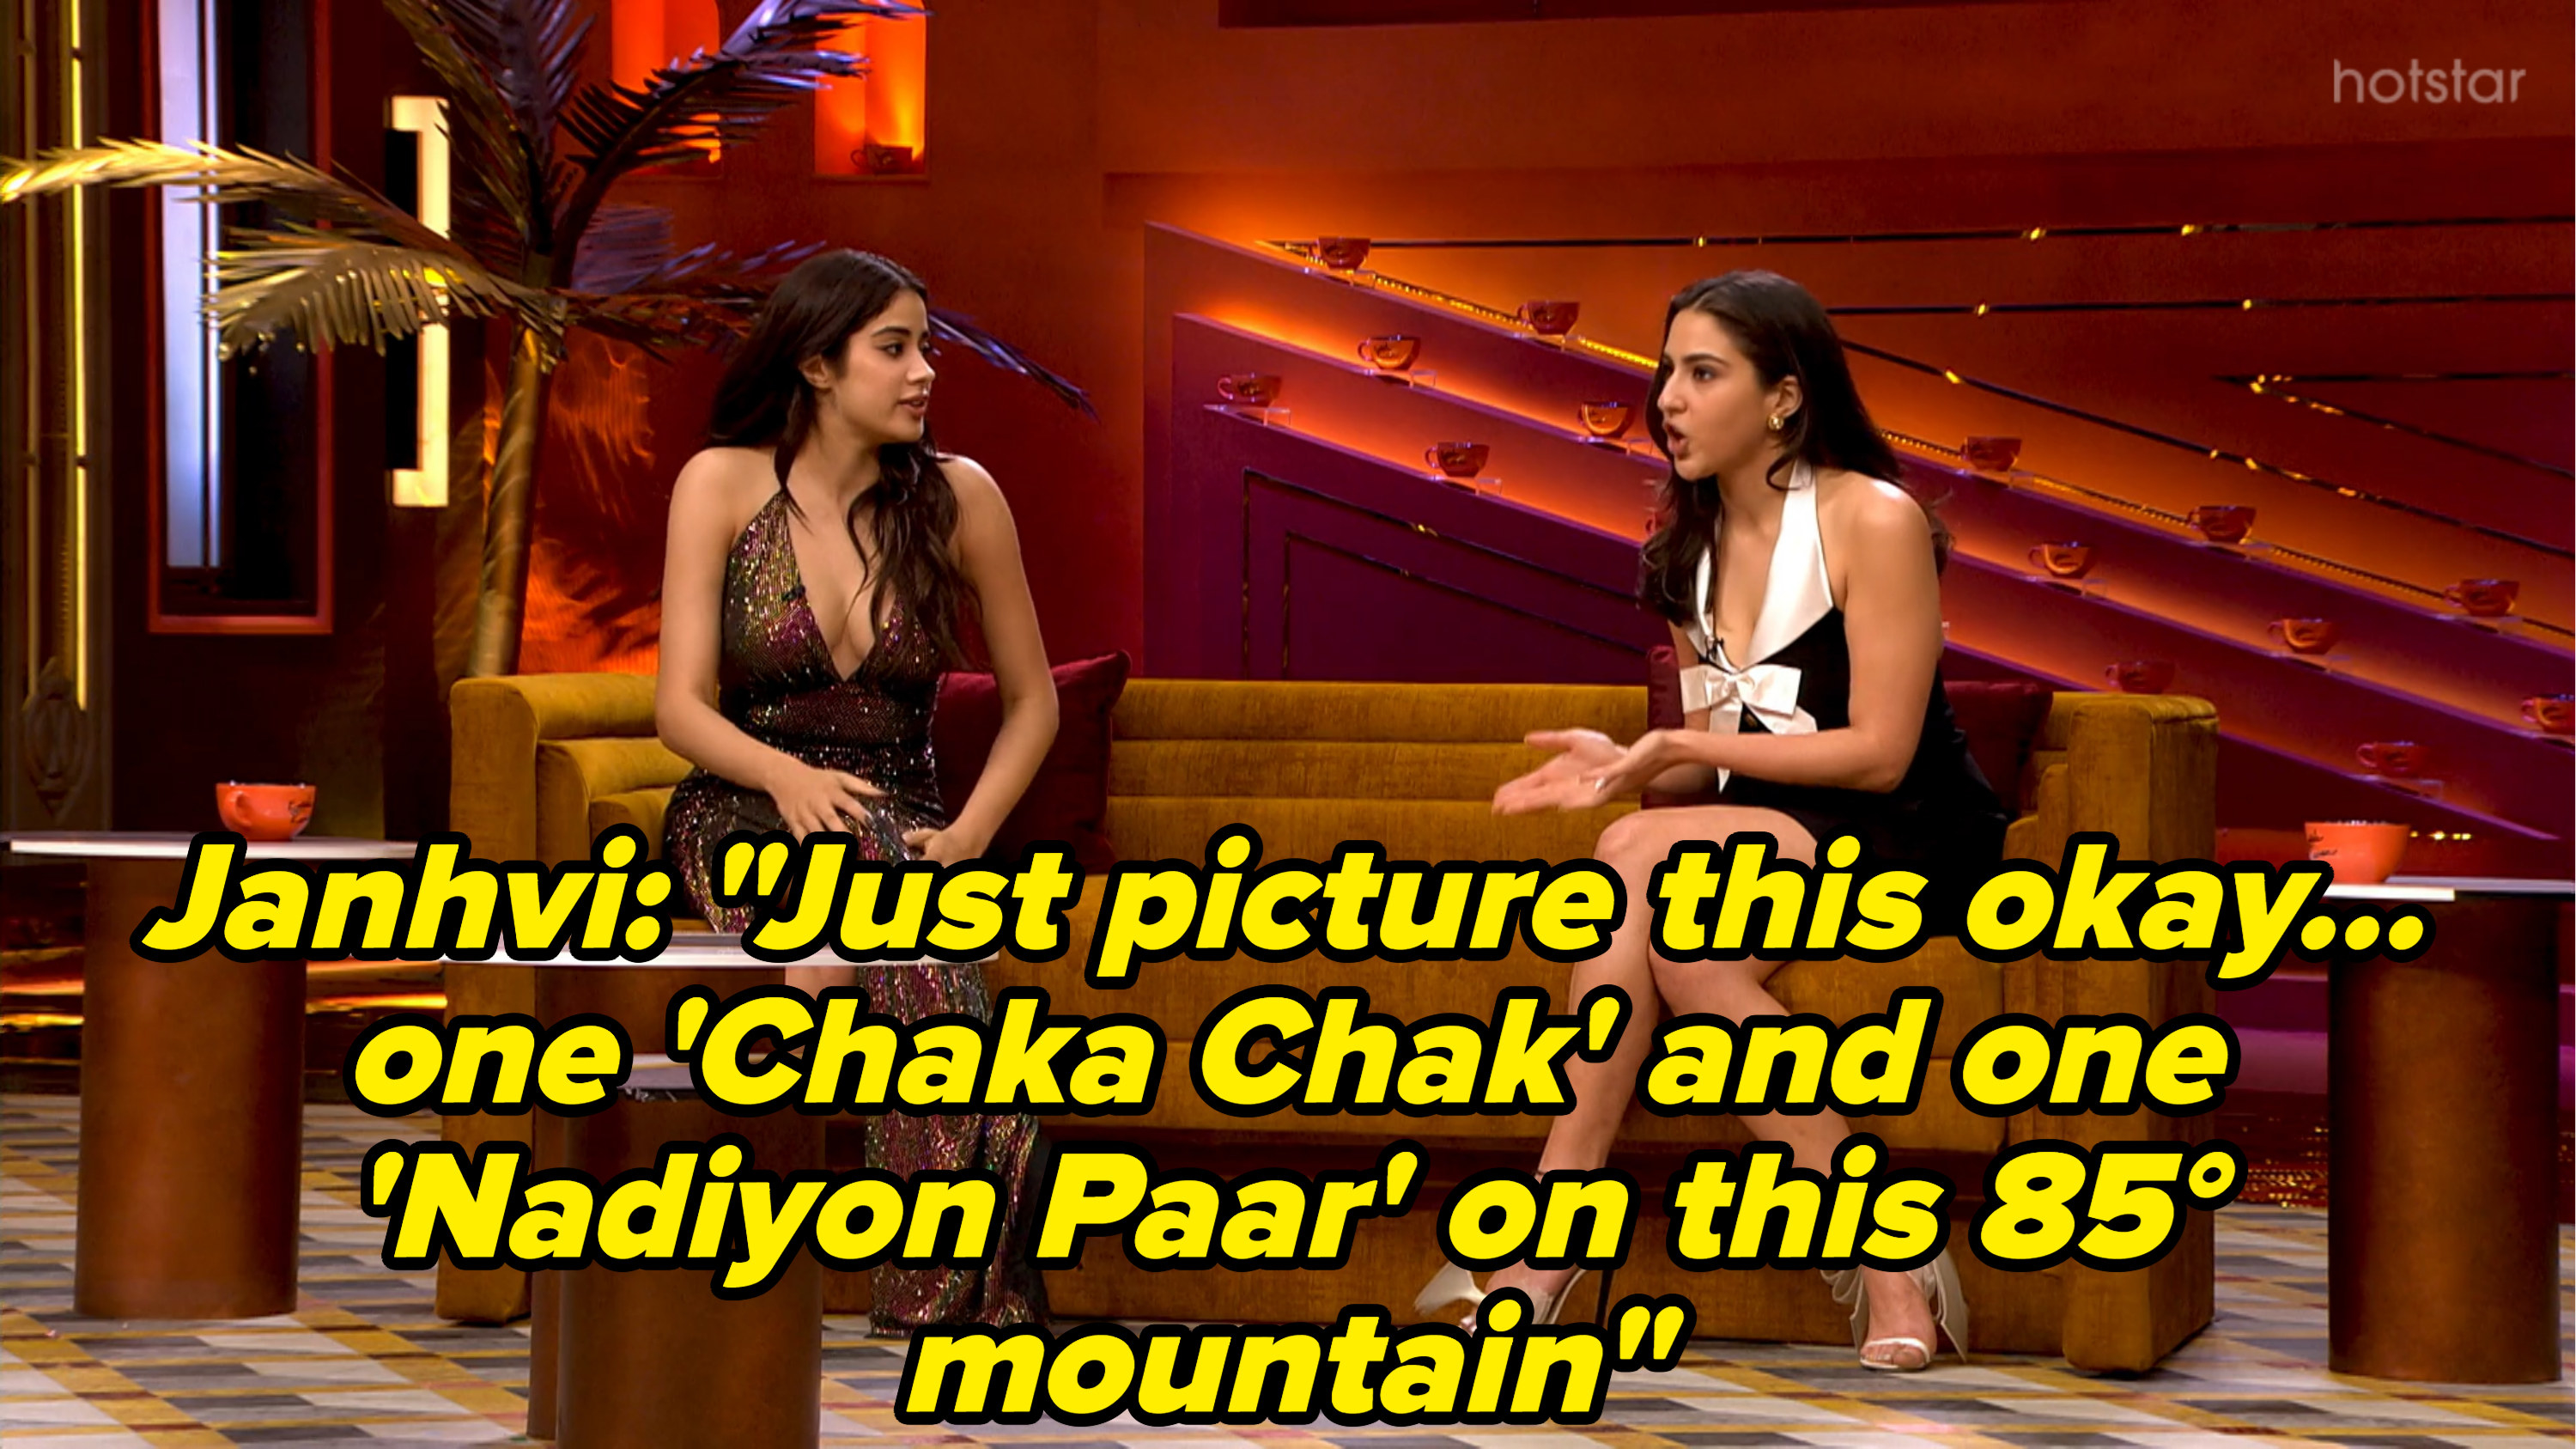 Janhvi Kapoor and Sara Ali Khan on the couch